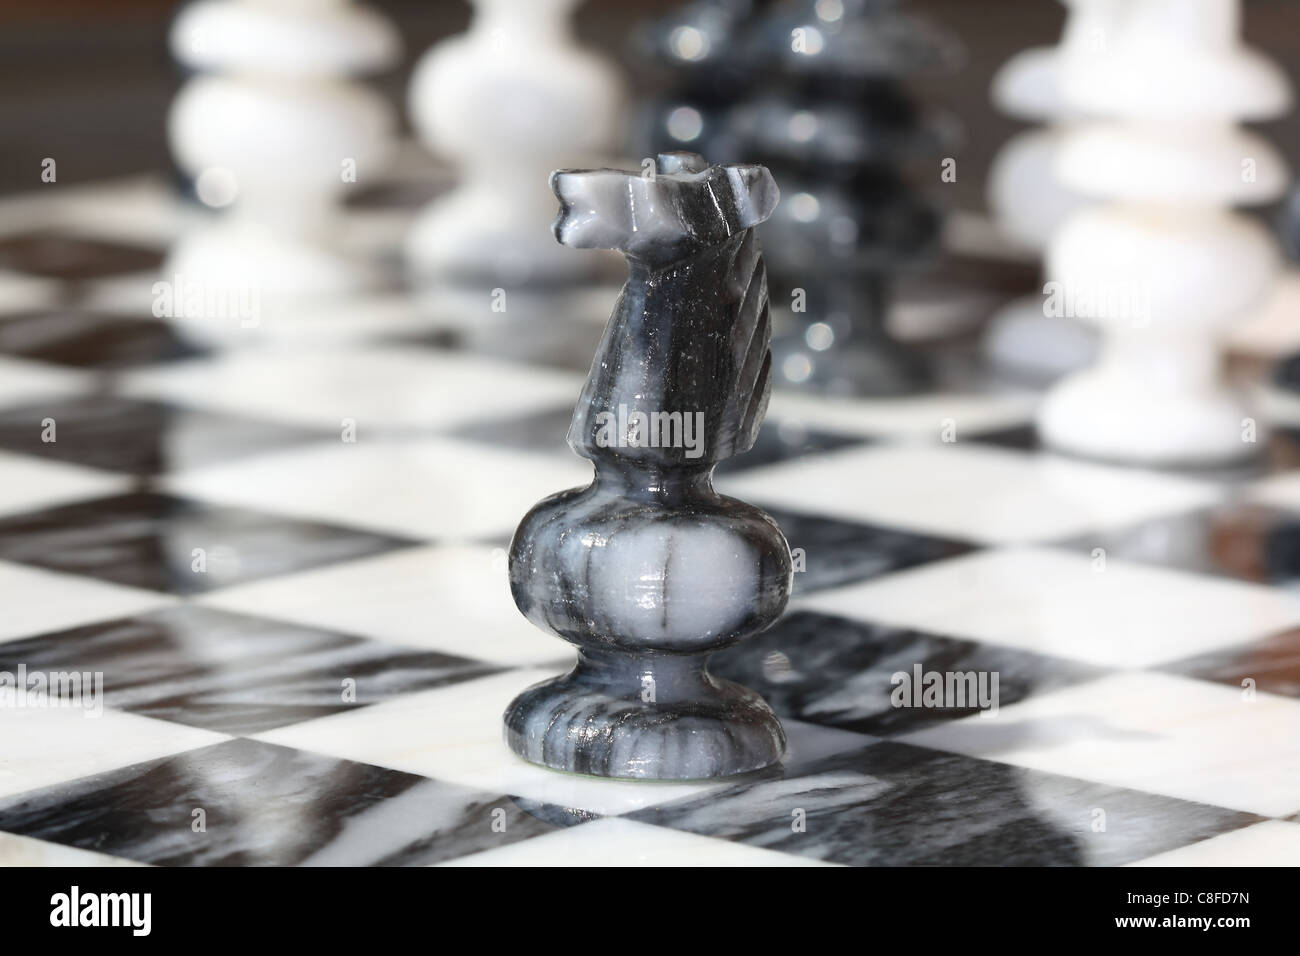 Emphasis On Knight Chess Piece Yellow Stock Photo 1320925034